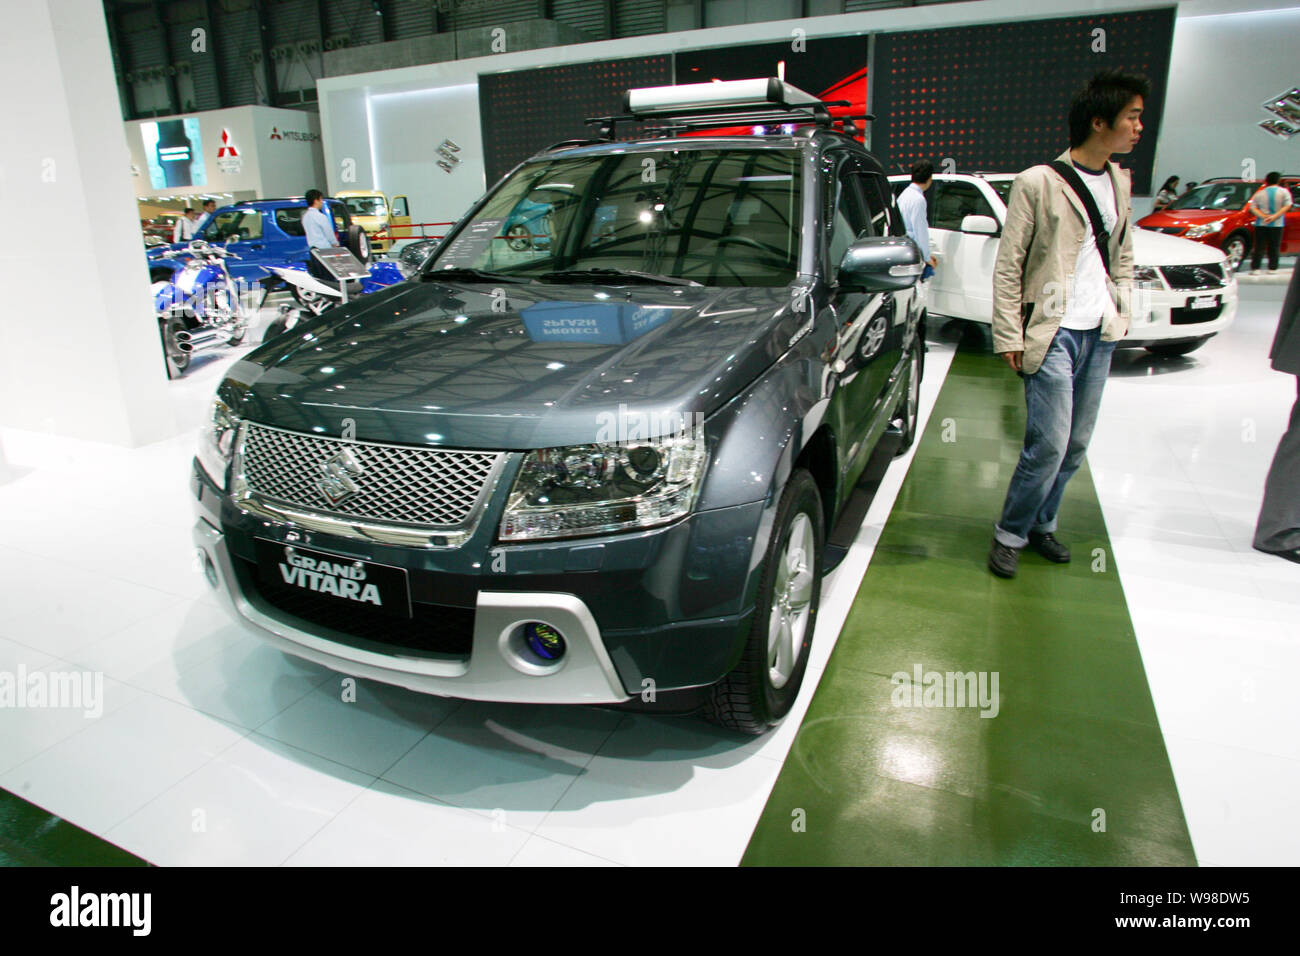 --FILE--A Suzuki Grand Vitara is seen on display at the 12th Shanghai International Automobile Industry Exhibition, known as Auto Shanghai 2007, in Sh Stock Photo